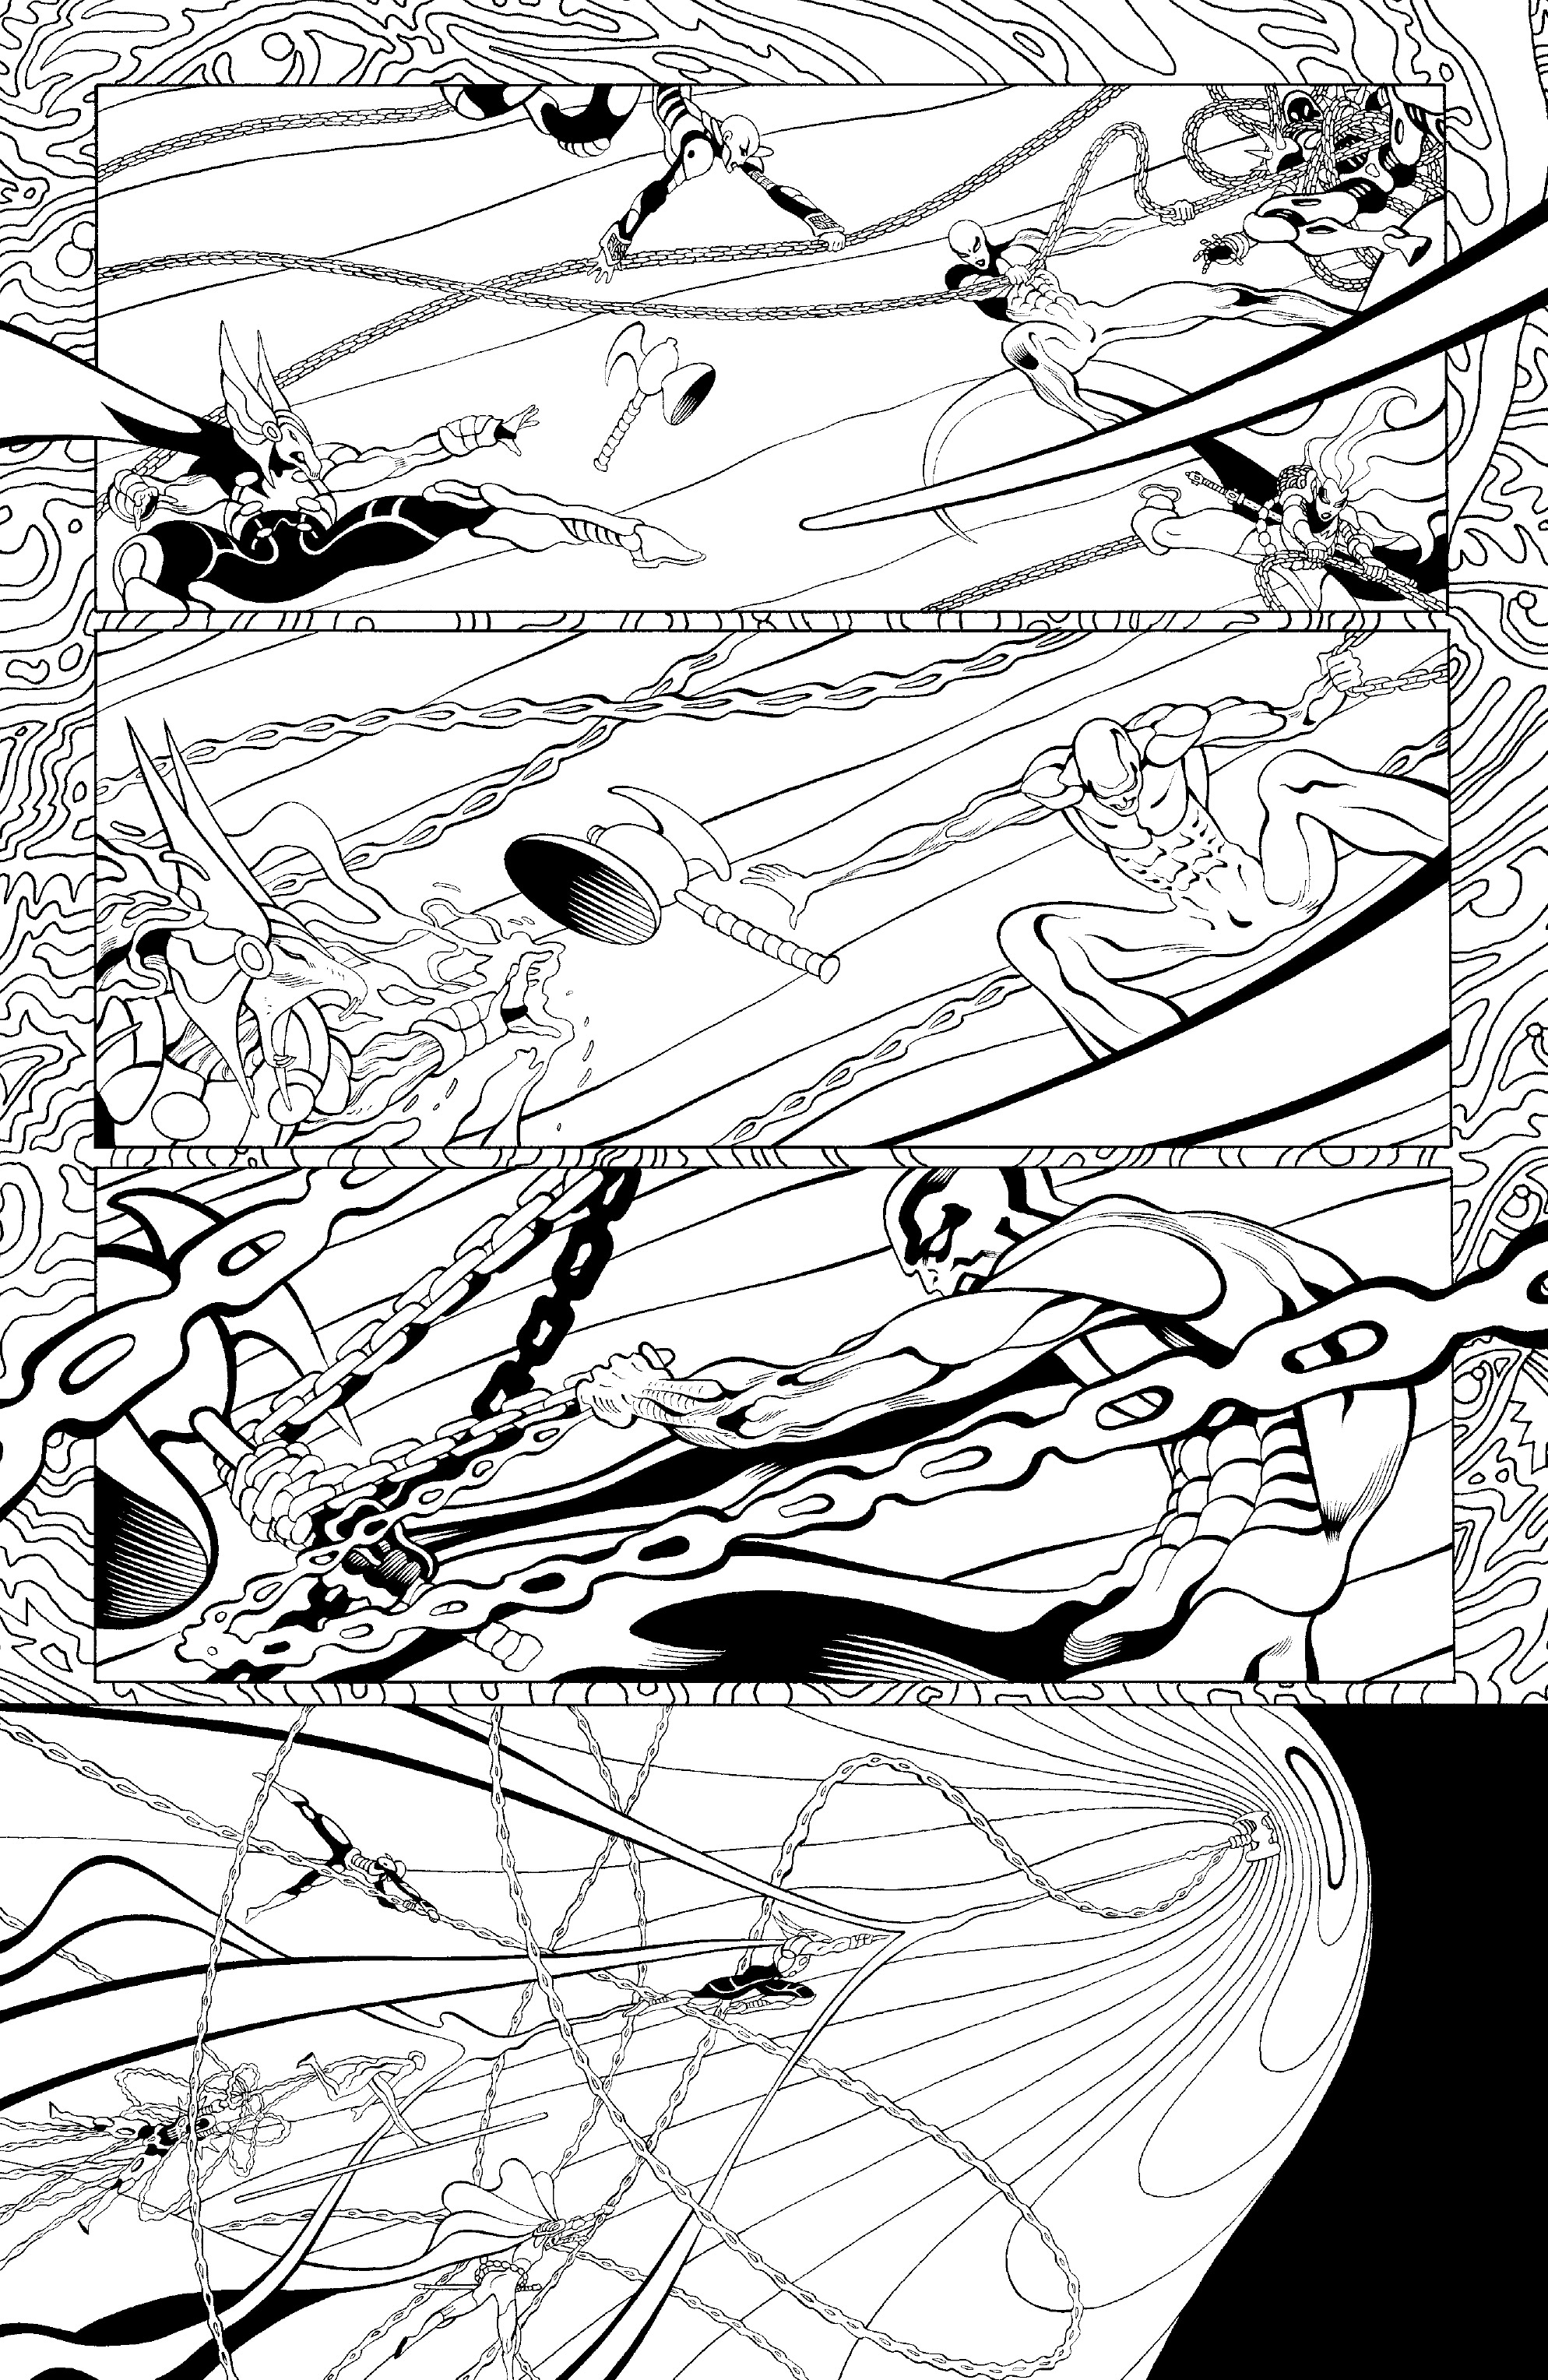 Read online Silver Surfer: Black comic -  Issue # _Director_s_Cut - 61